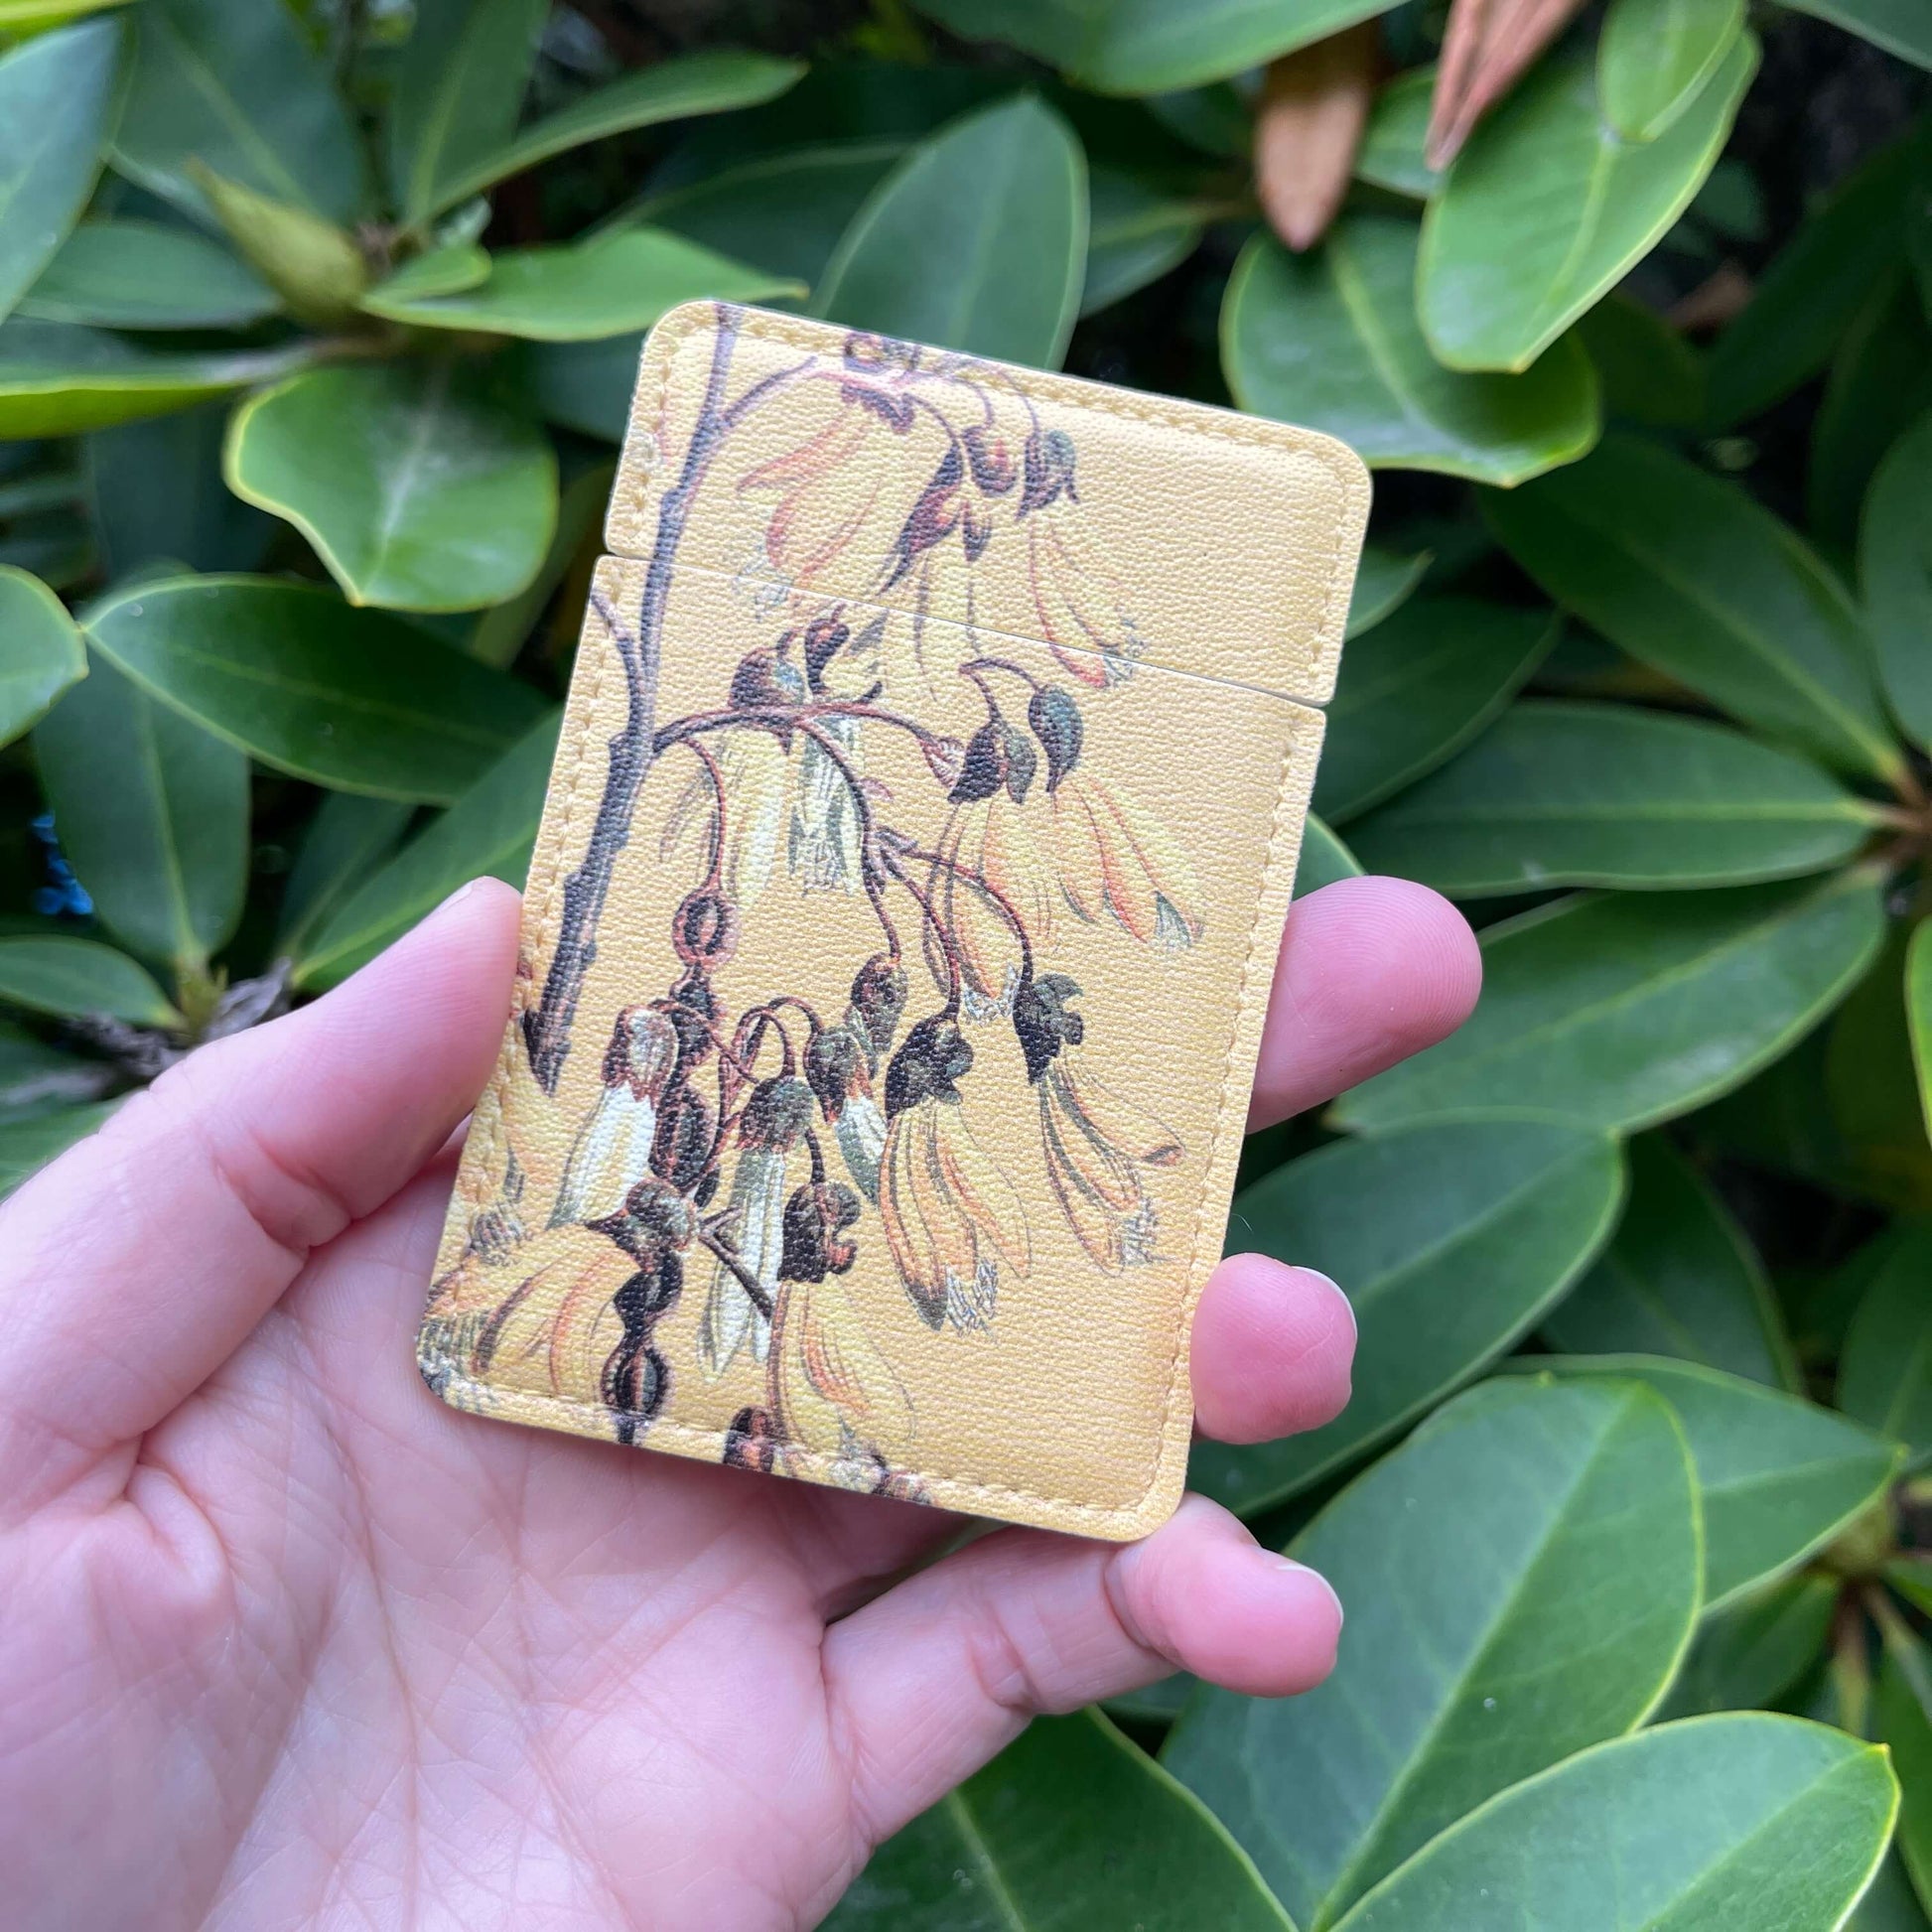 Pocket Mirror - Golden yellow cover with Kowhai flower print.